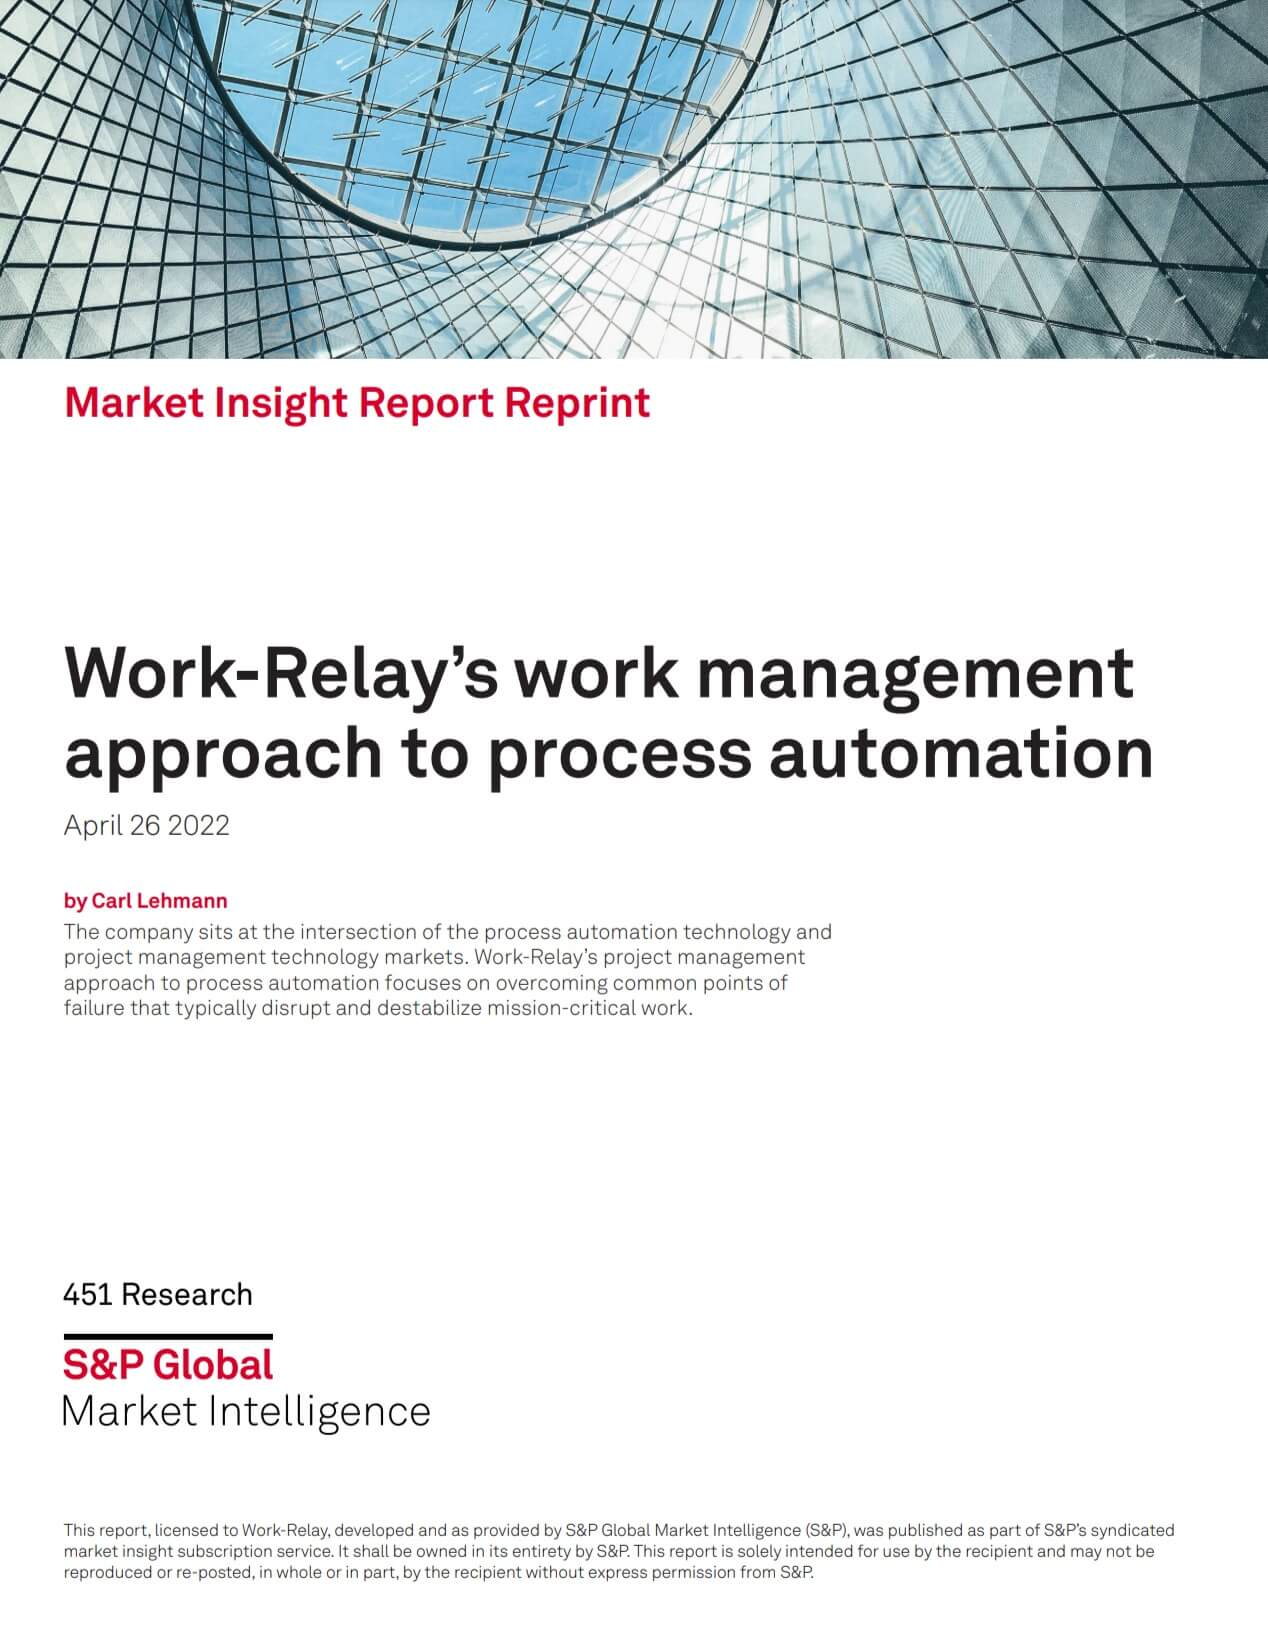 A preview of the analyst brief download that details how Work-Relay takes a work management approach to process automation